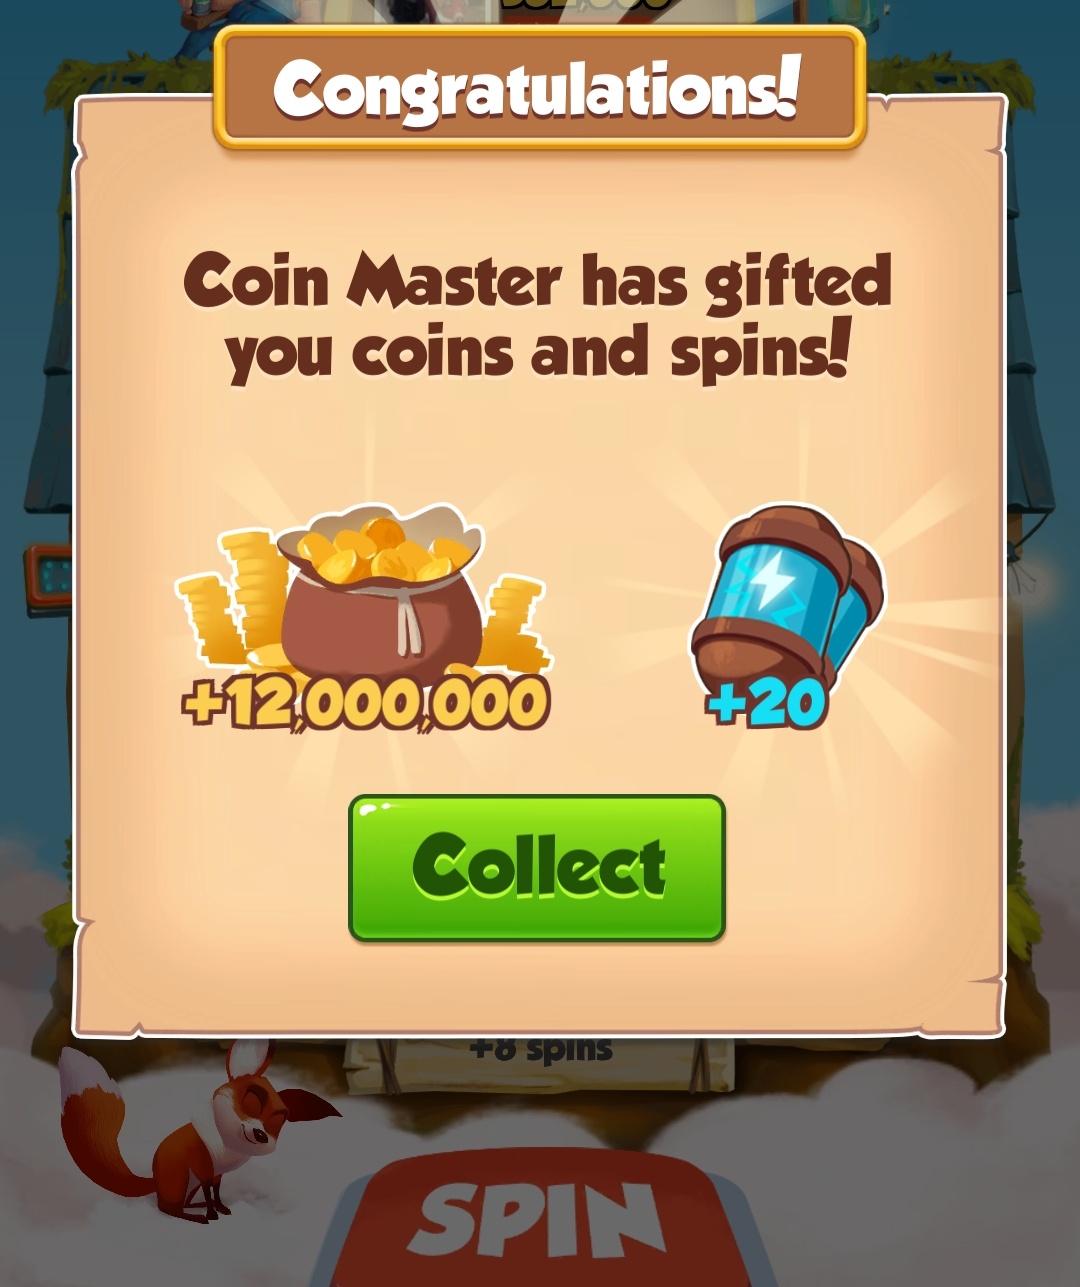 How can i get free coin master spins